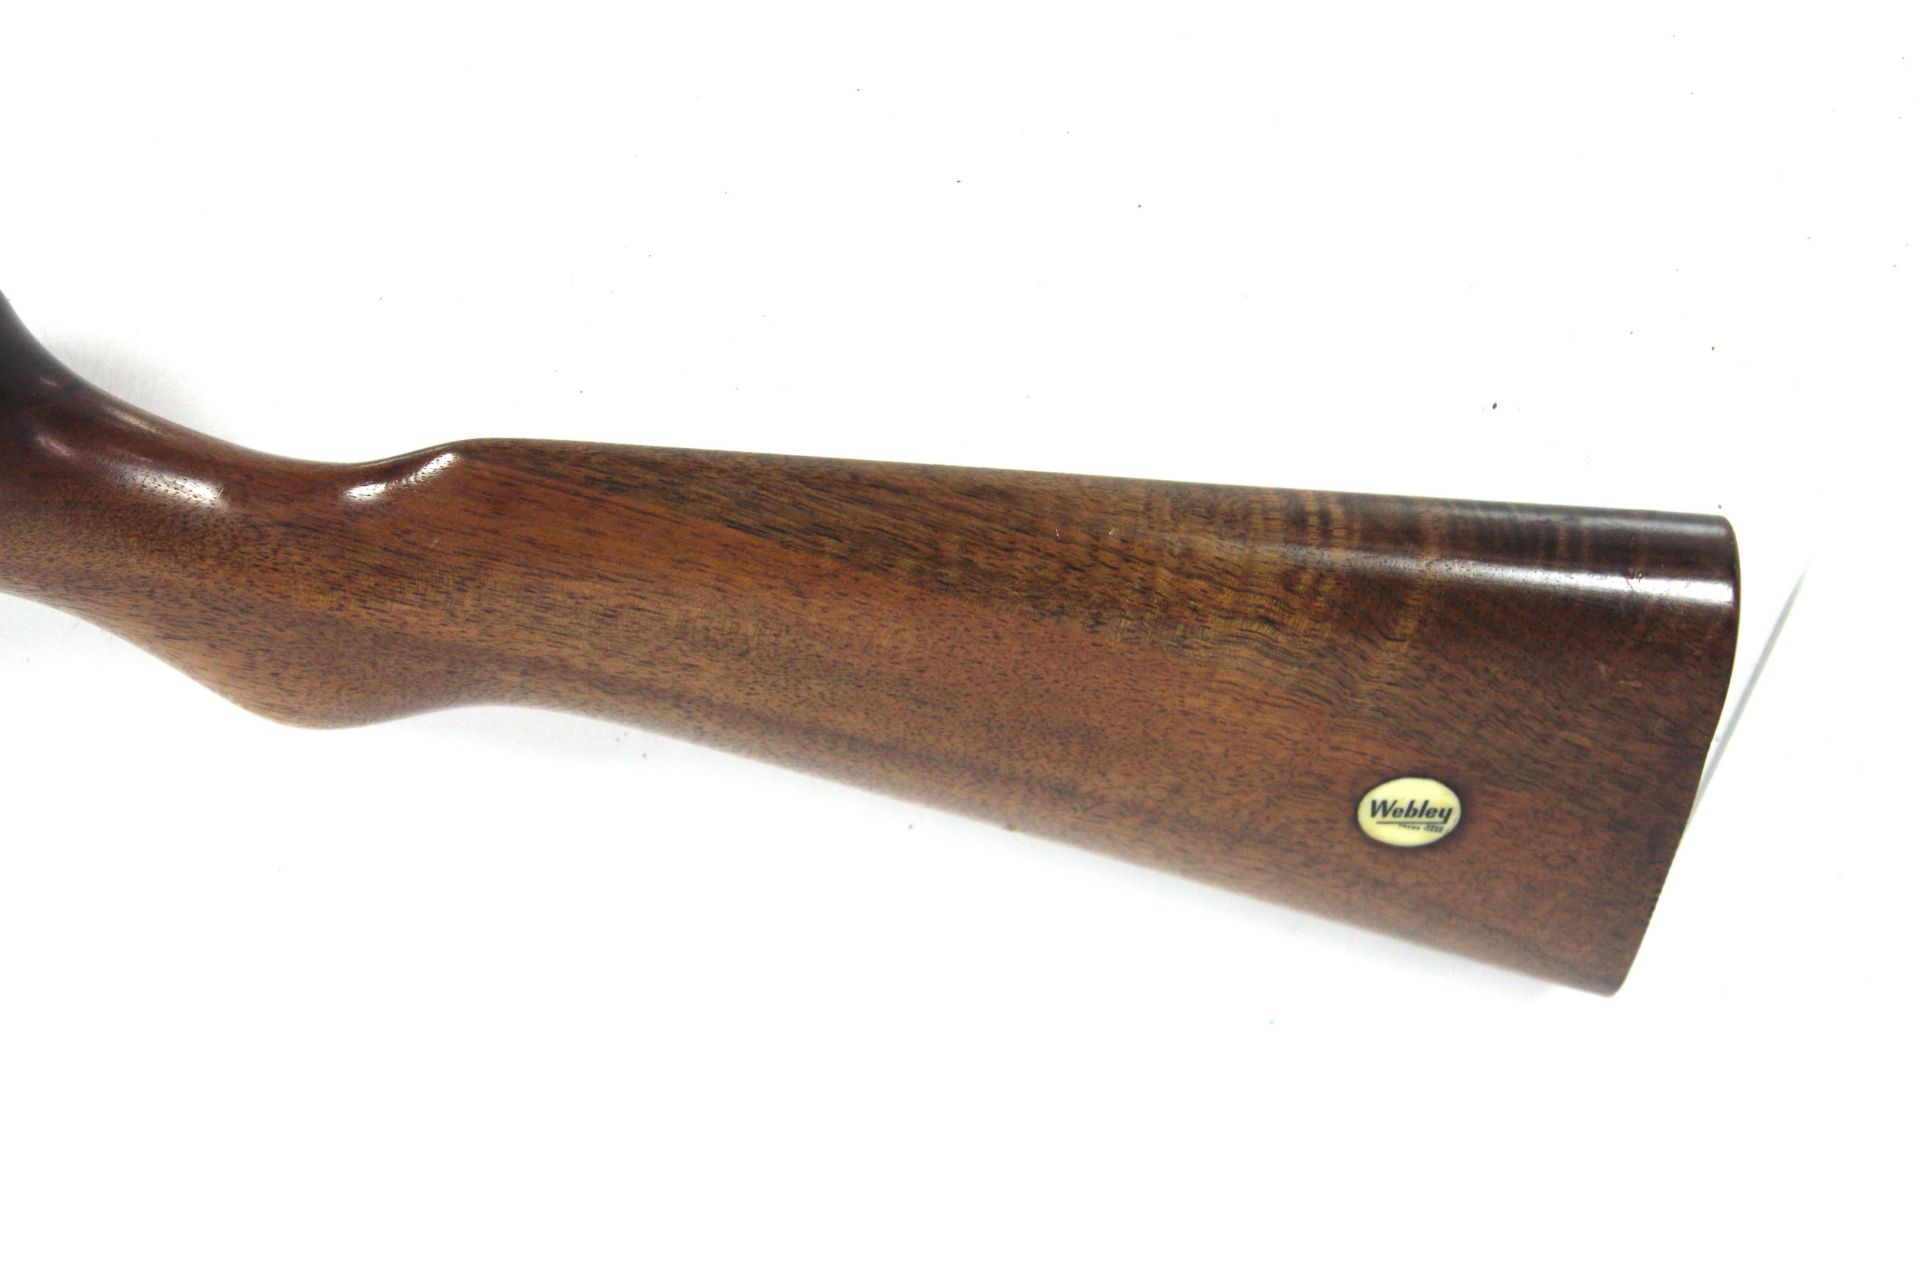 A Webley MkIII air rifle, Ser. No. 3677 in .177 Ca - Image 10 of 12